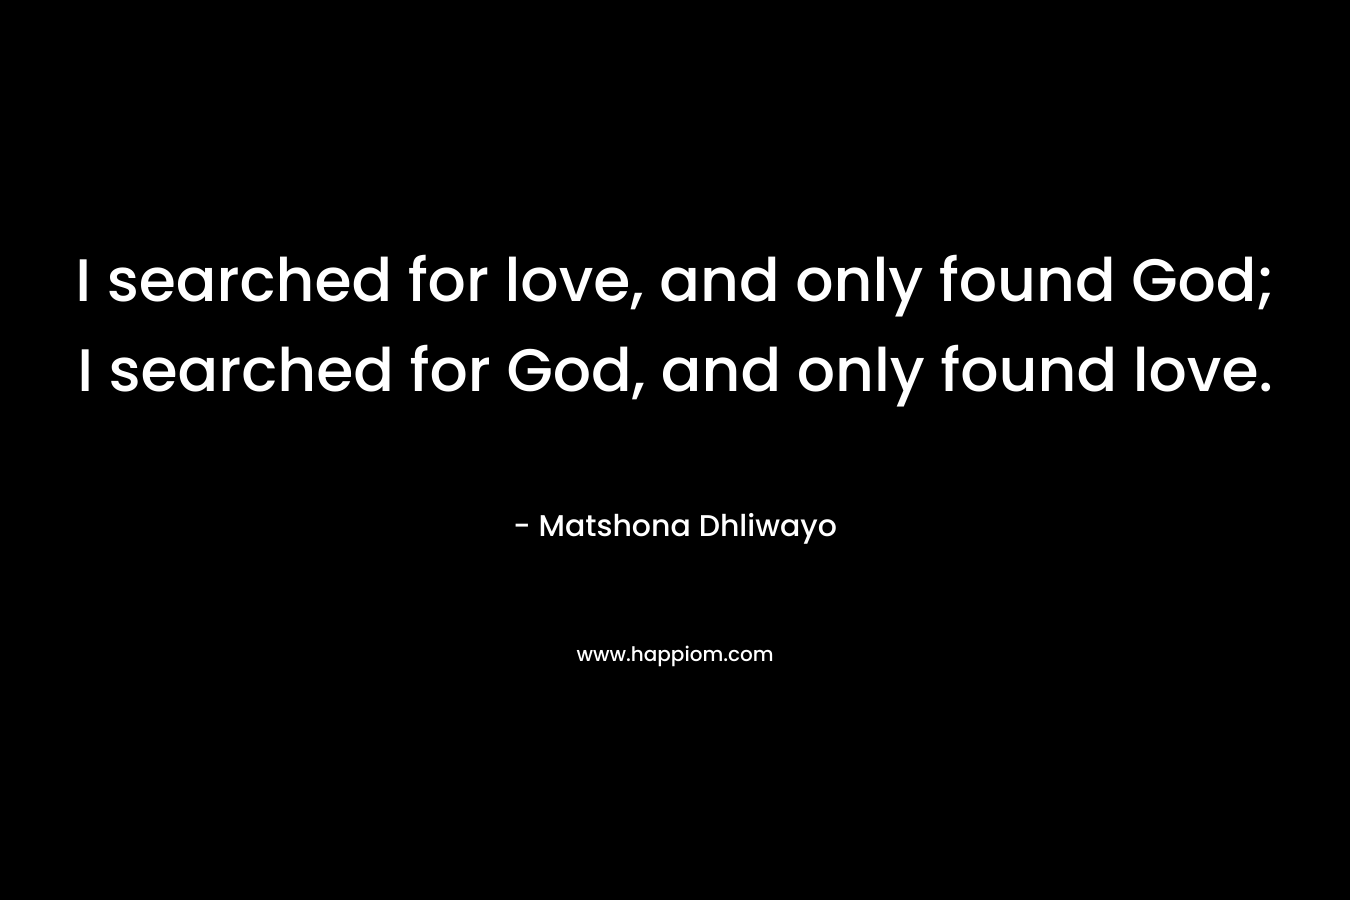 I searched for love, and only found God; I searched for God, and only found love.